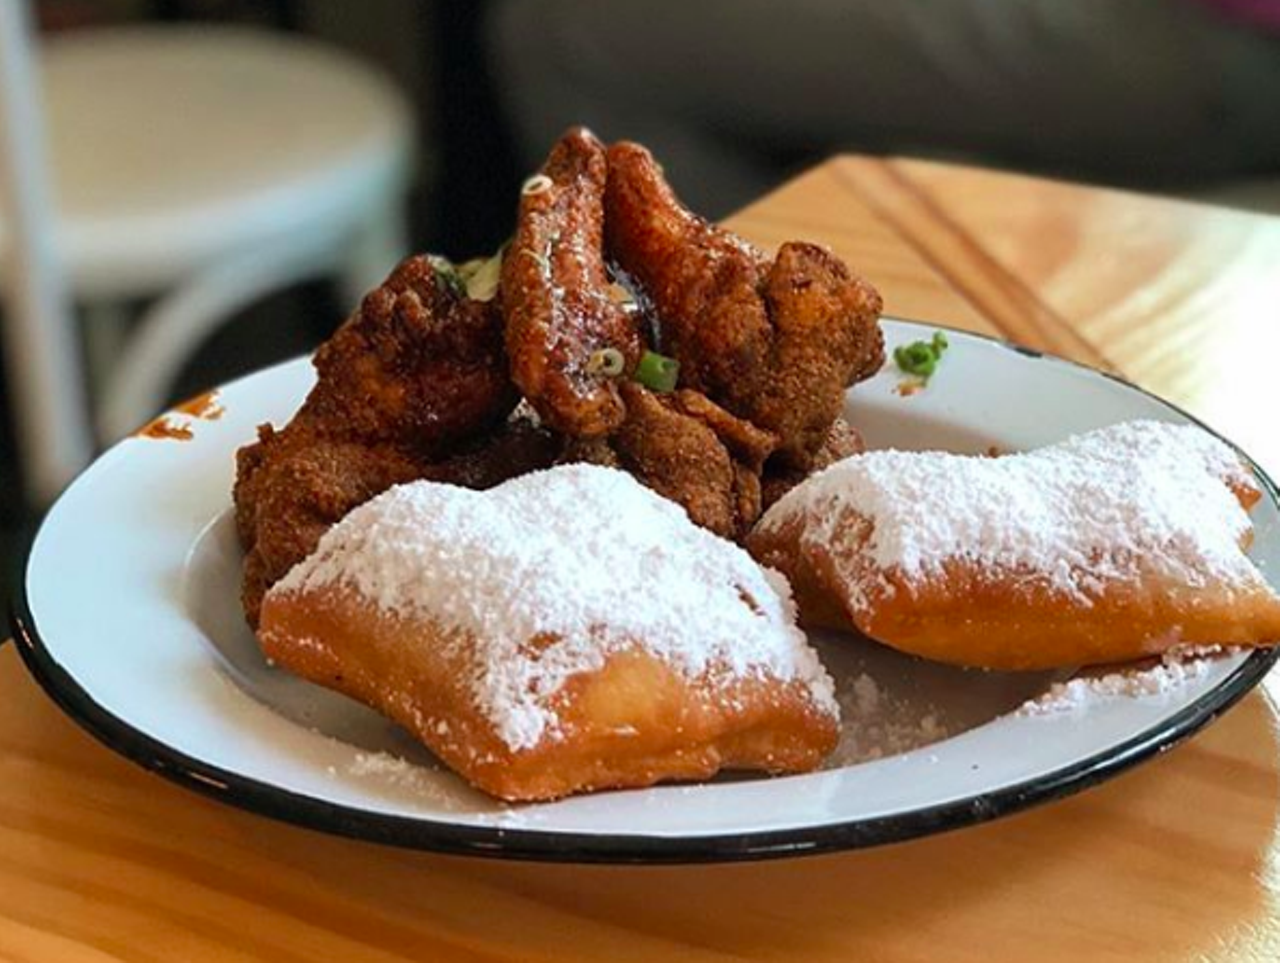 NOLA Brunch & Beignets
111 Kings Ct, (210) 320-1572, eatatnola.com
Particular about your bubbles or have a penchant for Cook's? You can drink whatever you please at NOLA Brunch & Beignets, which pairs Cajun breakfast staples with a BYOB attitude.
Photo via Instagram / countdowncityconnoisseurs